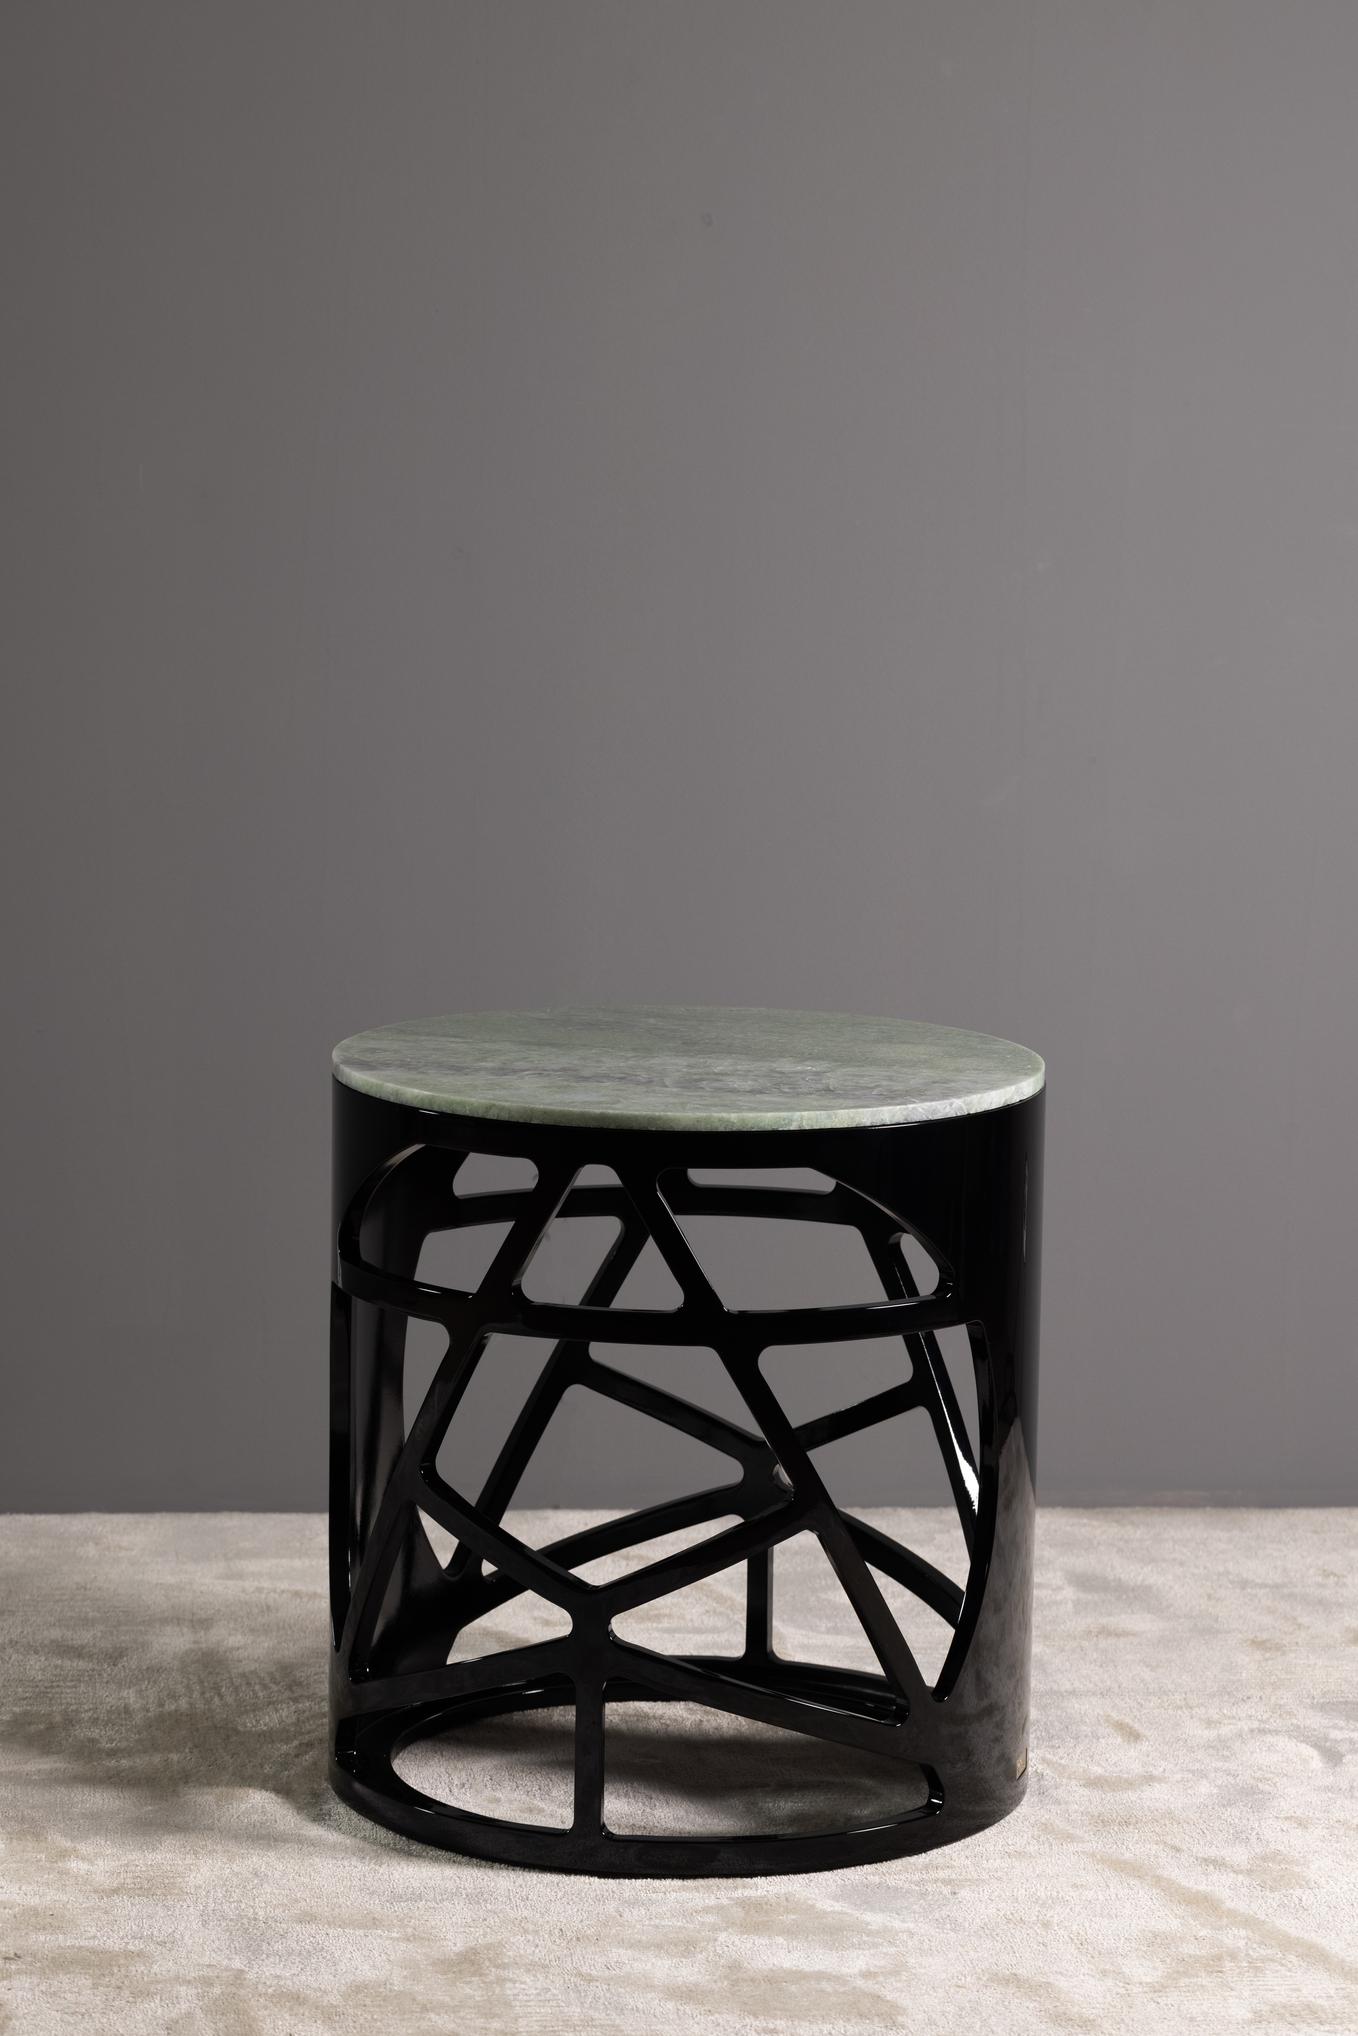 Art Deco Pyrite Side Table, Calacatta Marble, Handmade in Portugal by Greenapple For Sale 1